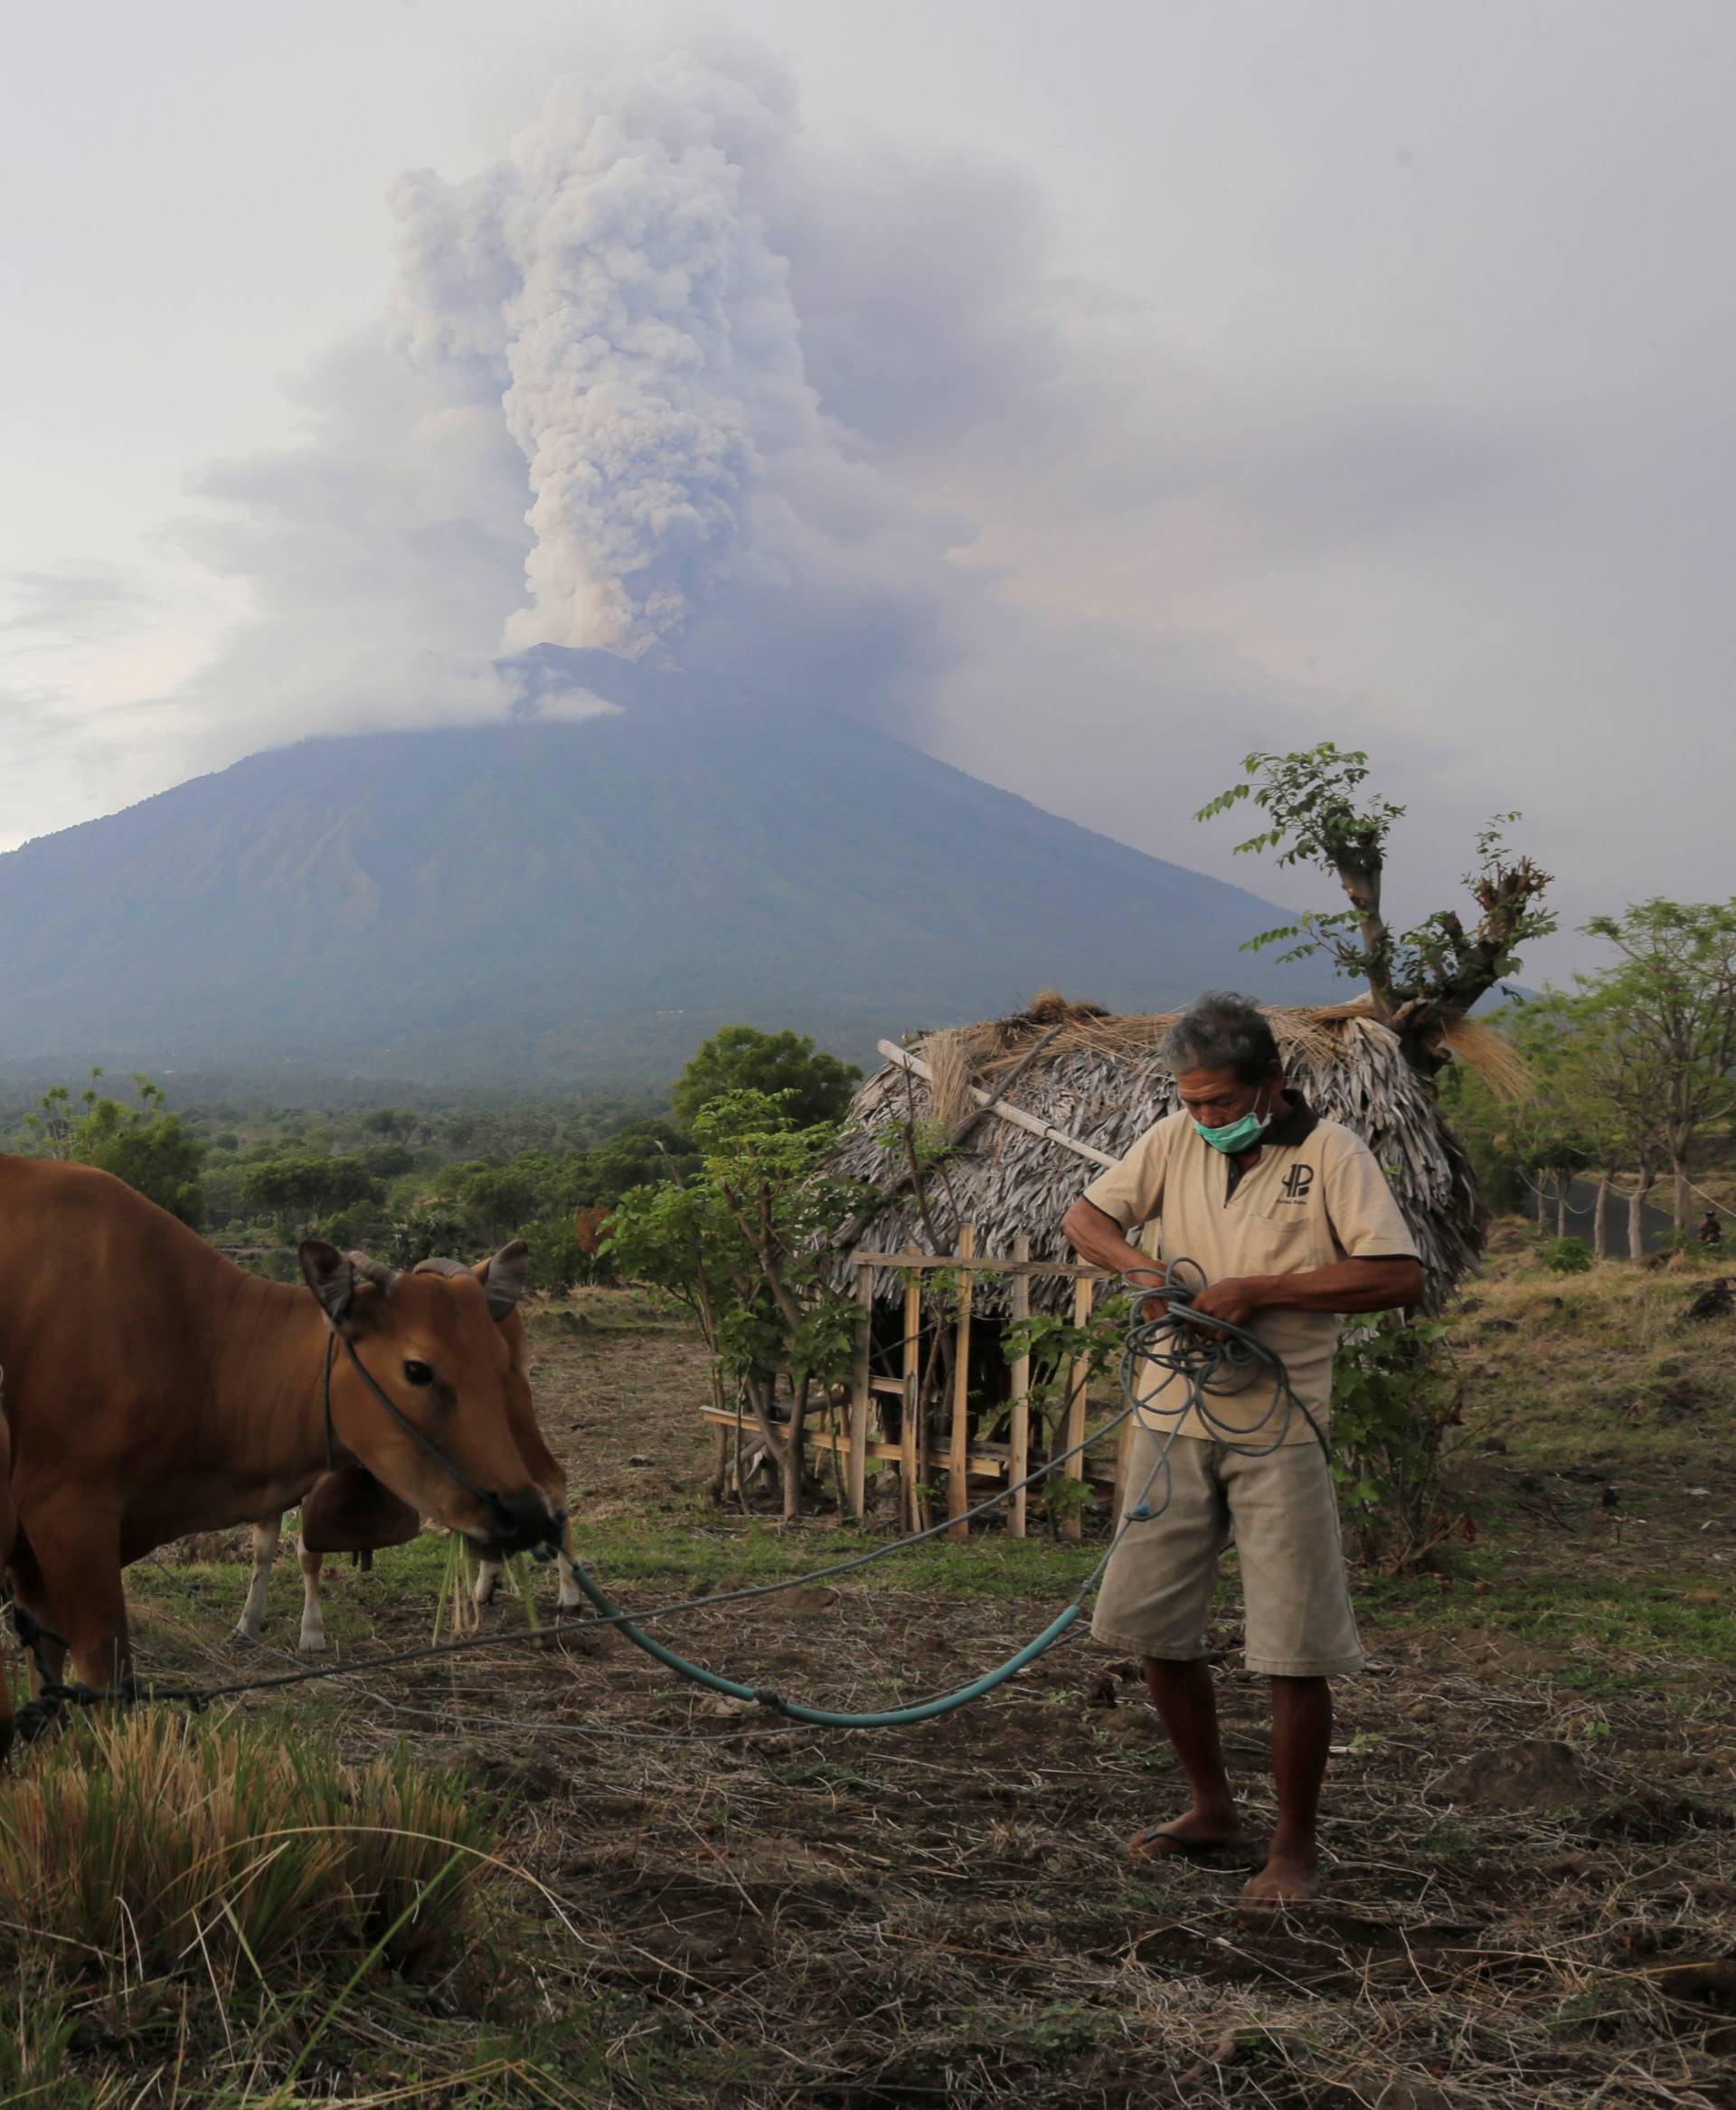 A farmer walks with his cattle as Mount Agung volcano erupts in the background in Karangasem, Bali